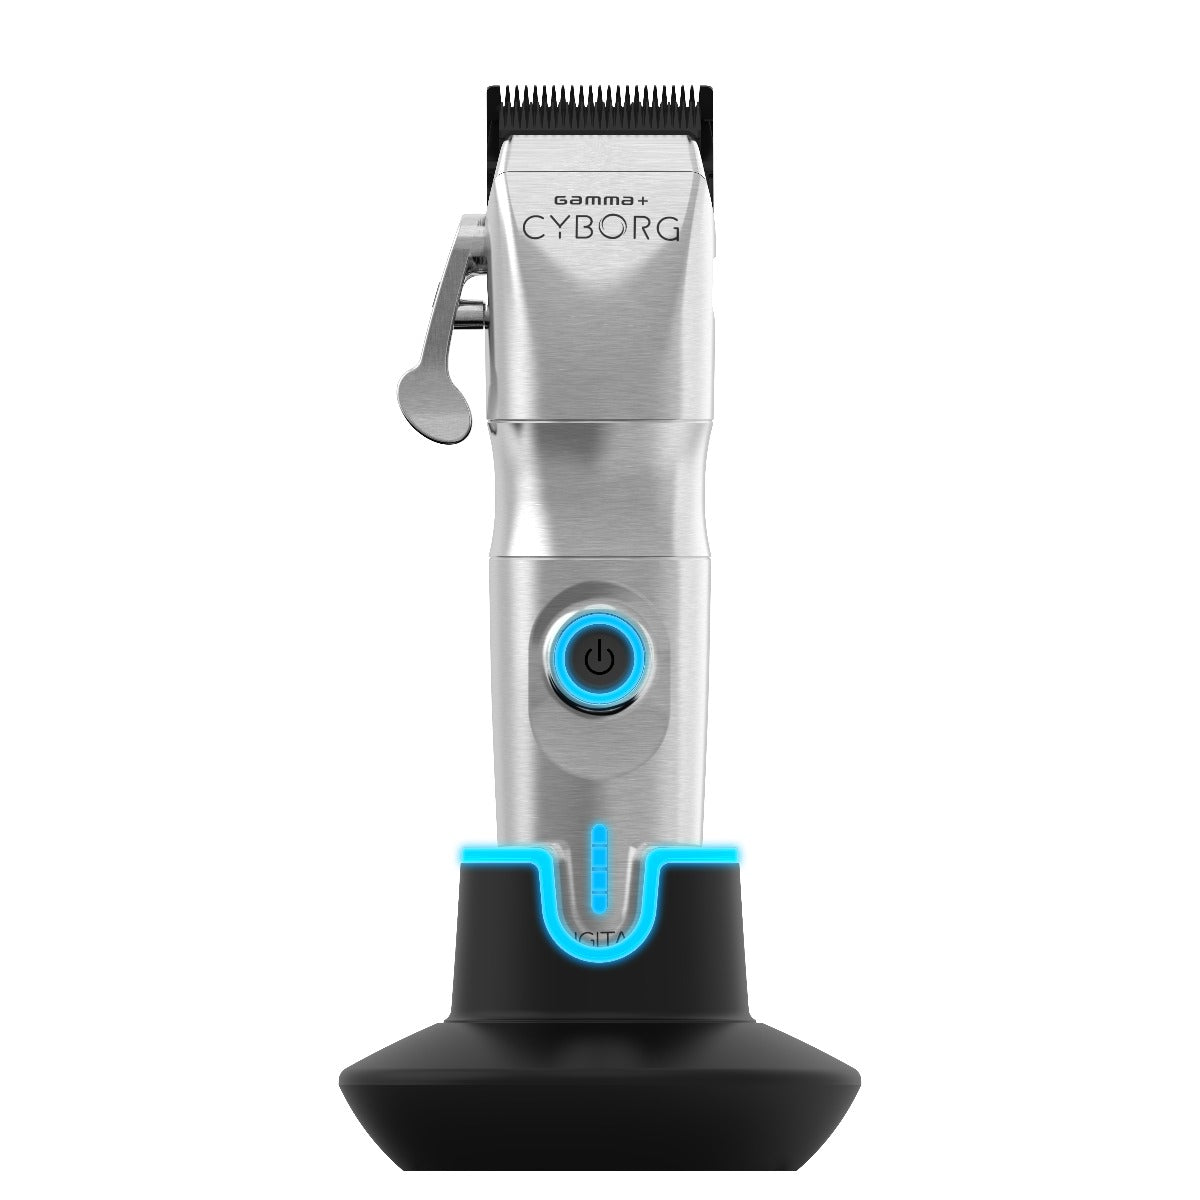 Gamma+ Cyborg Metal Wireless Hair Clipper on Charger